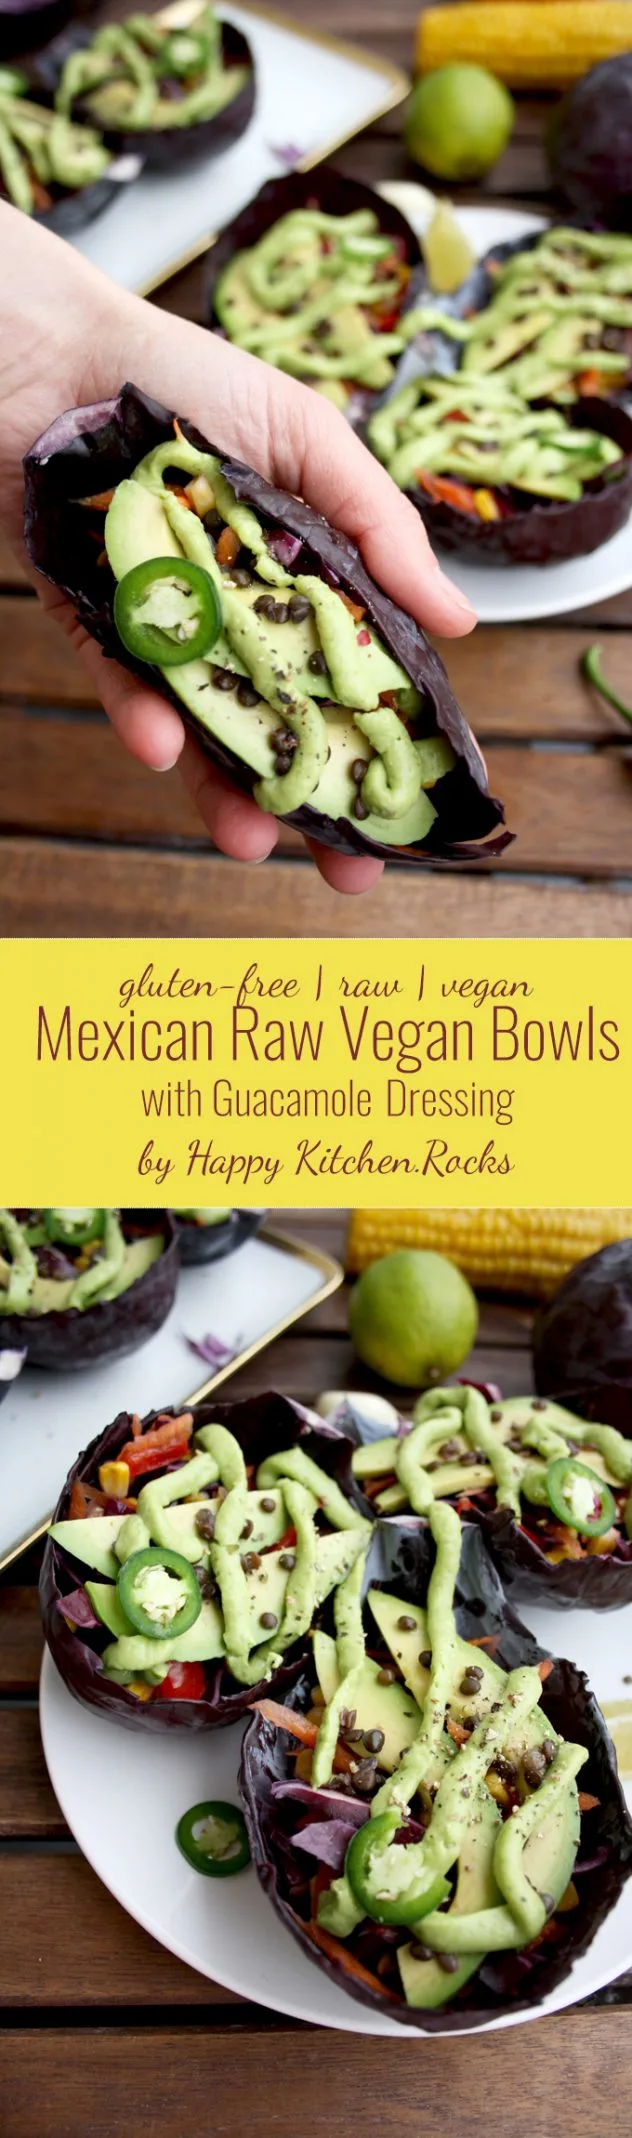 Mexican Raw Vegan Bowls with Guacamole Dressing Served in Cabbage Leaves: Easy and healthy mess-free snack full of Mexican flavors, nutrients and veggie goodness.